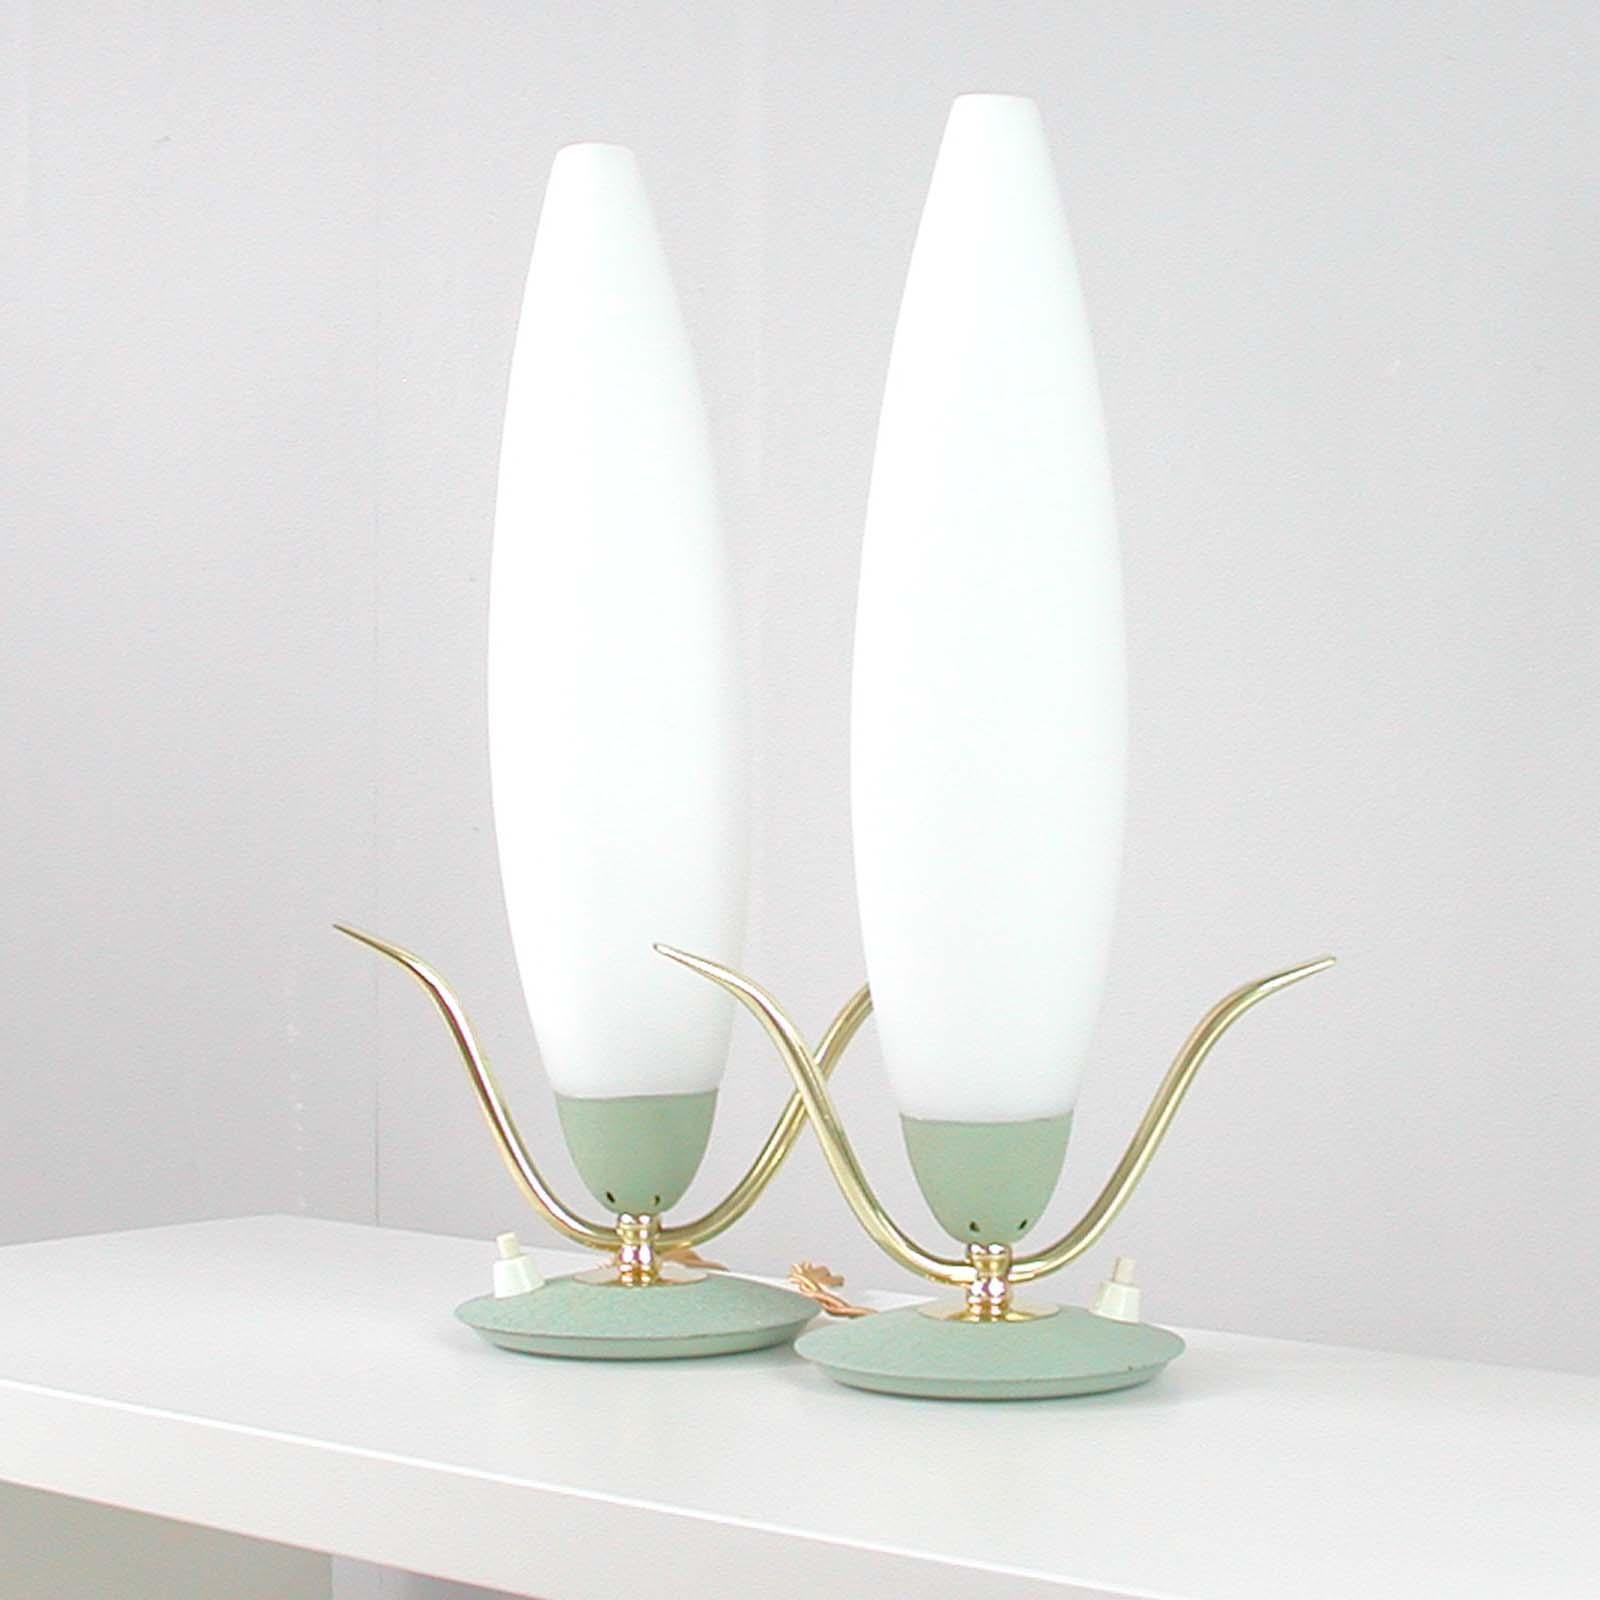 This set of 2 table lamps was manufactured in Italy in the 1950s. 

The lamps are made of light mint green lacquered metal and brass and have got opaline glass rocket style lampshades.

The lamps have been polished, rewired and can be used in